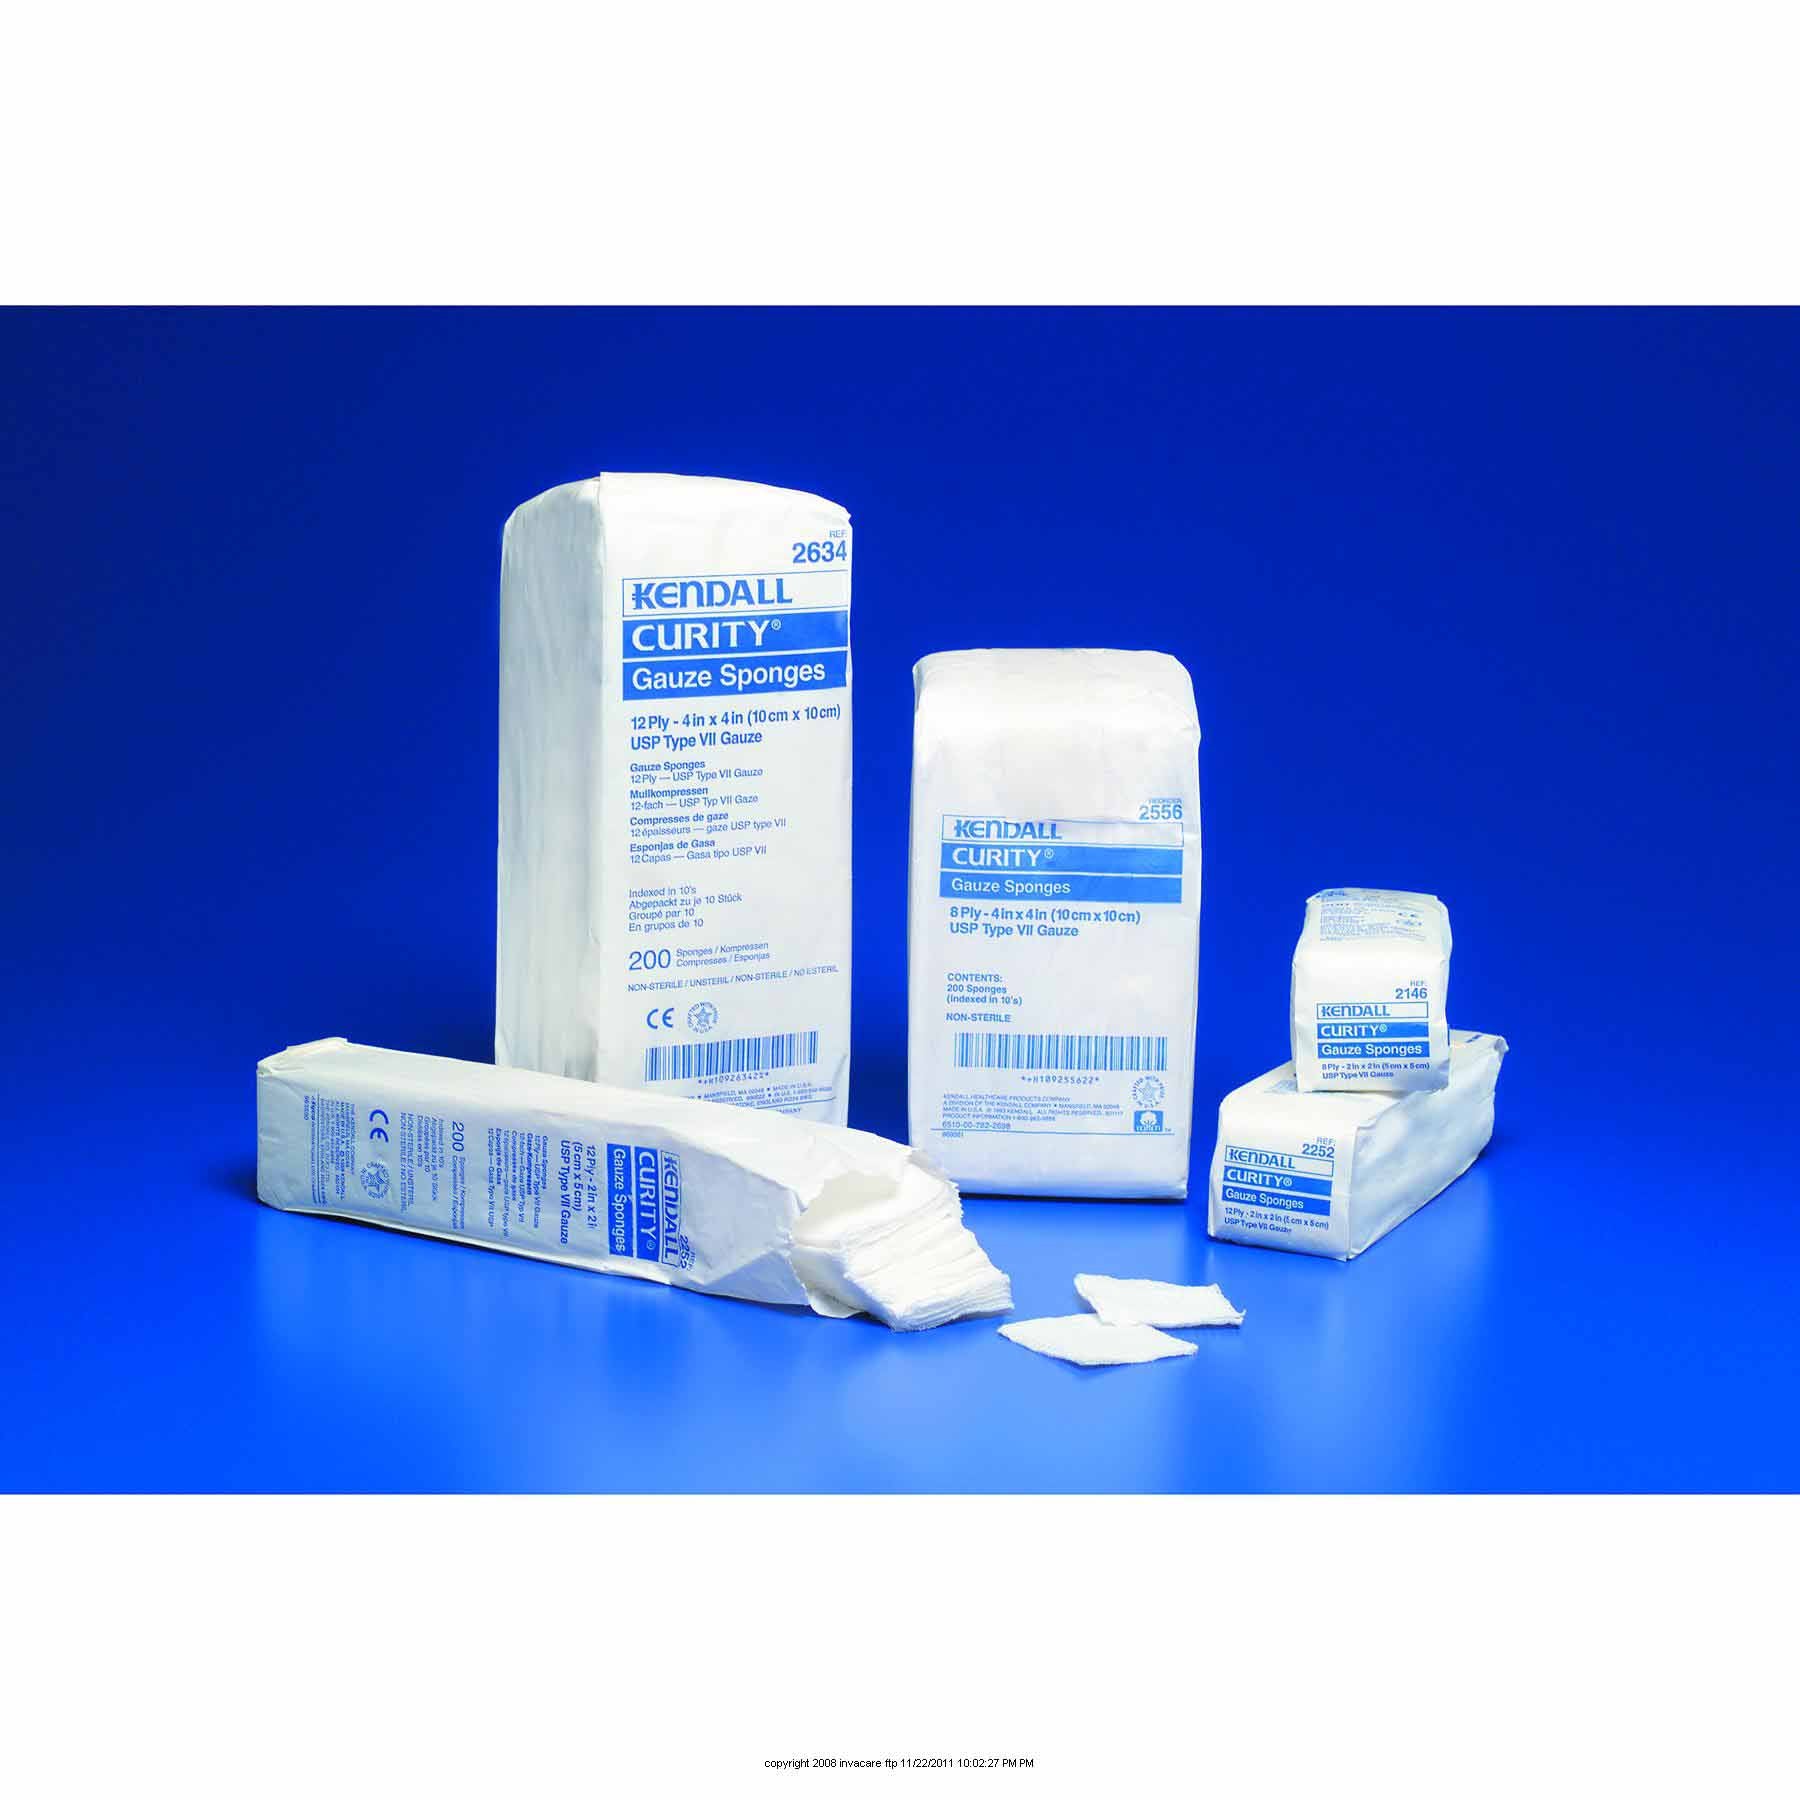 CURITY Suture Removal Kit - Covidien